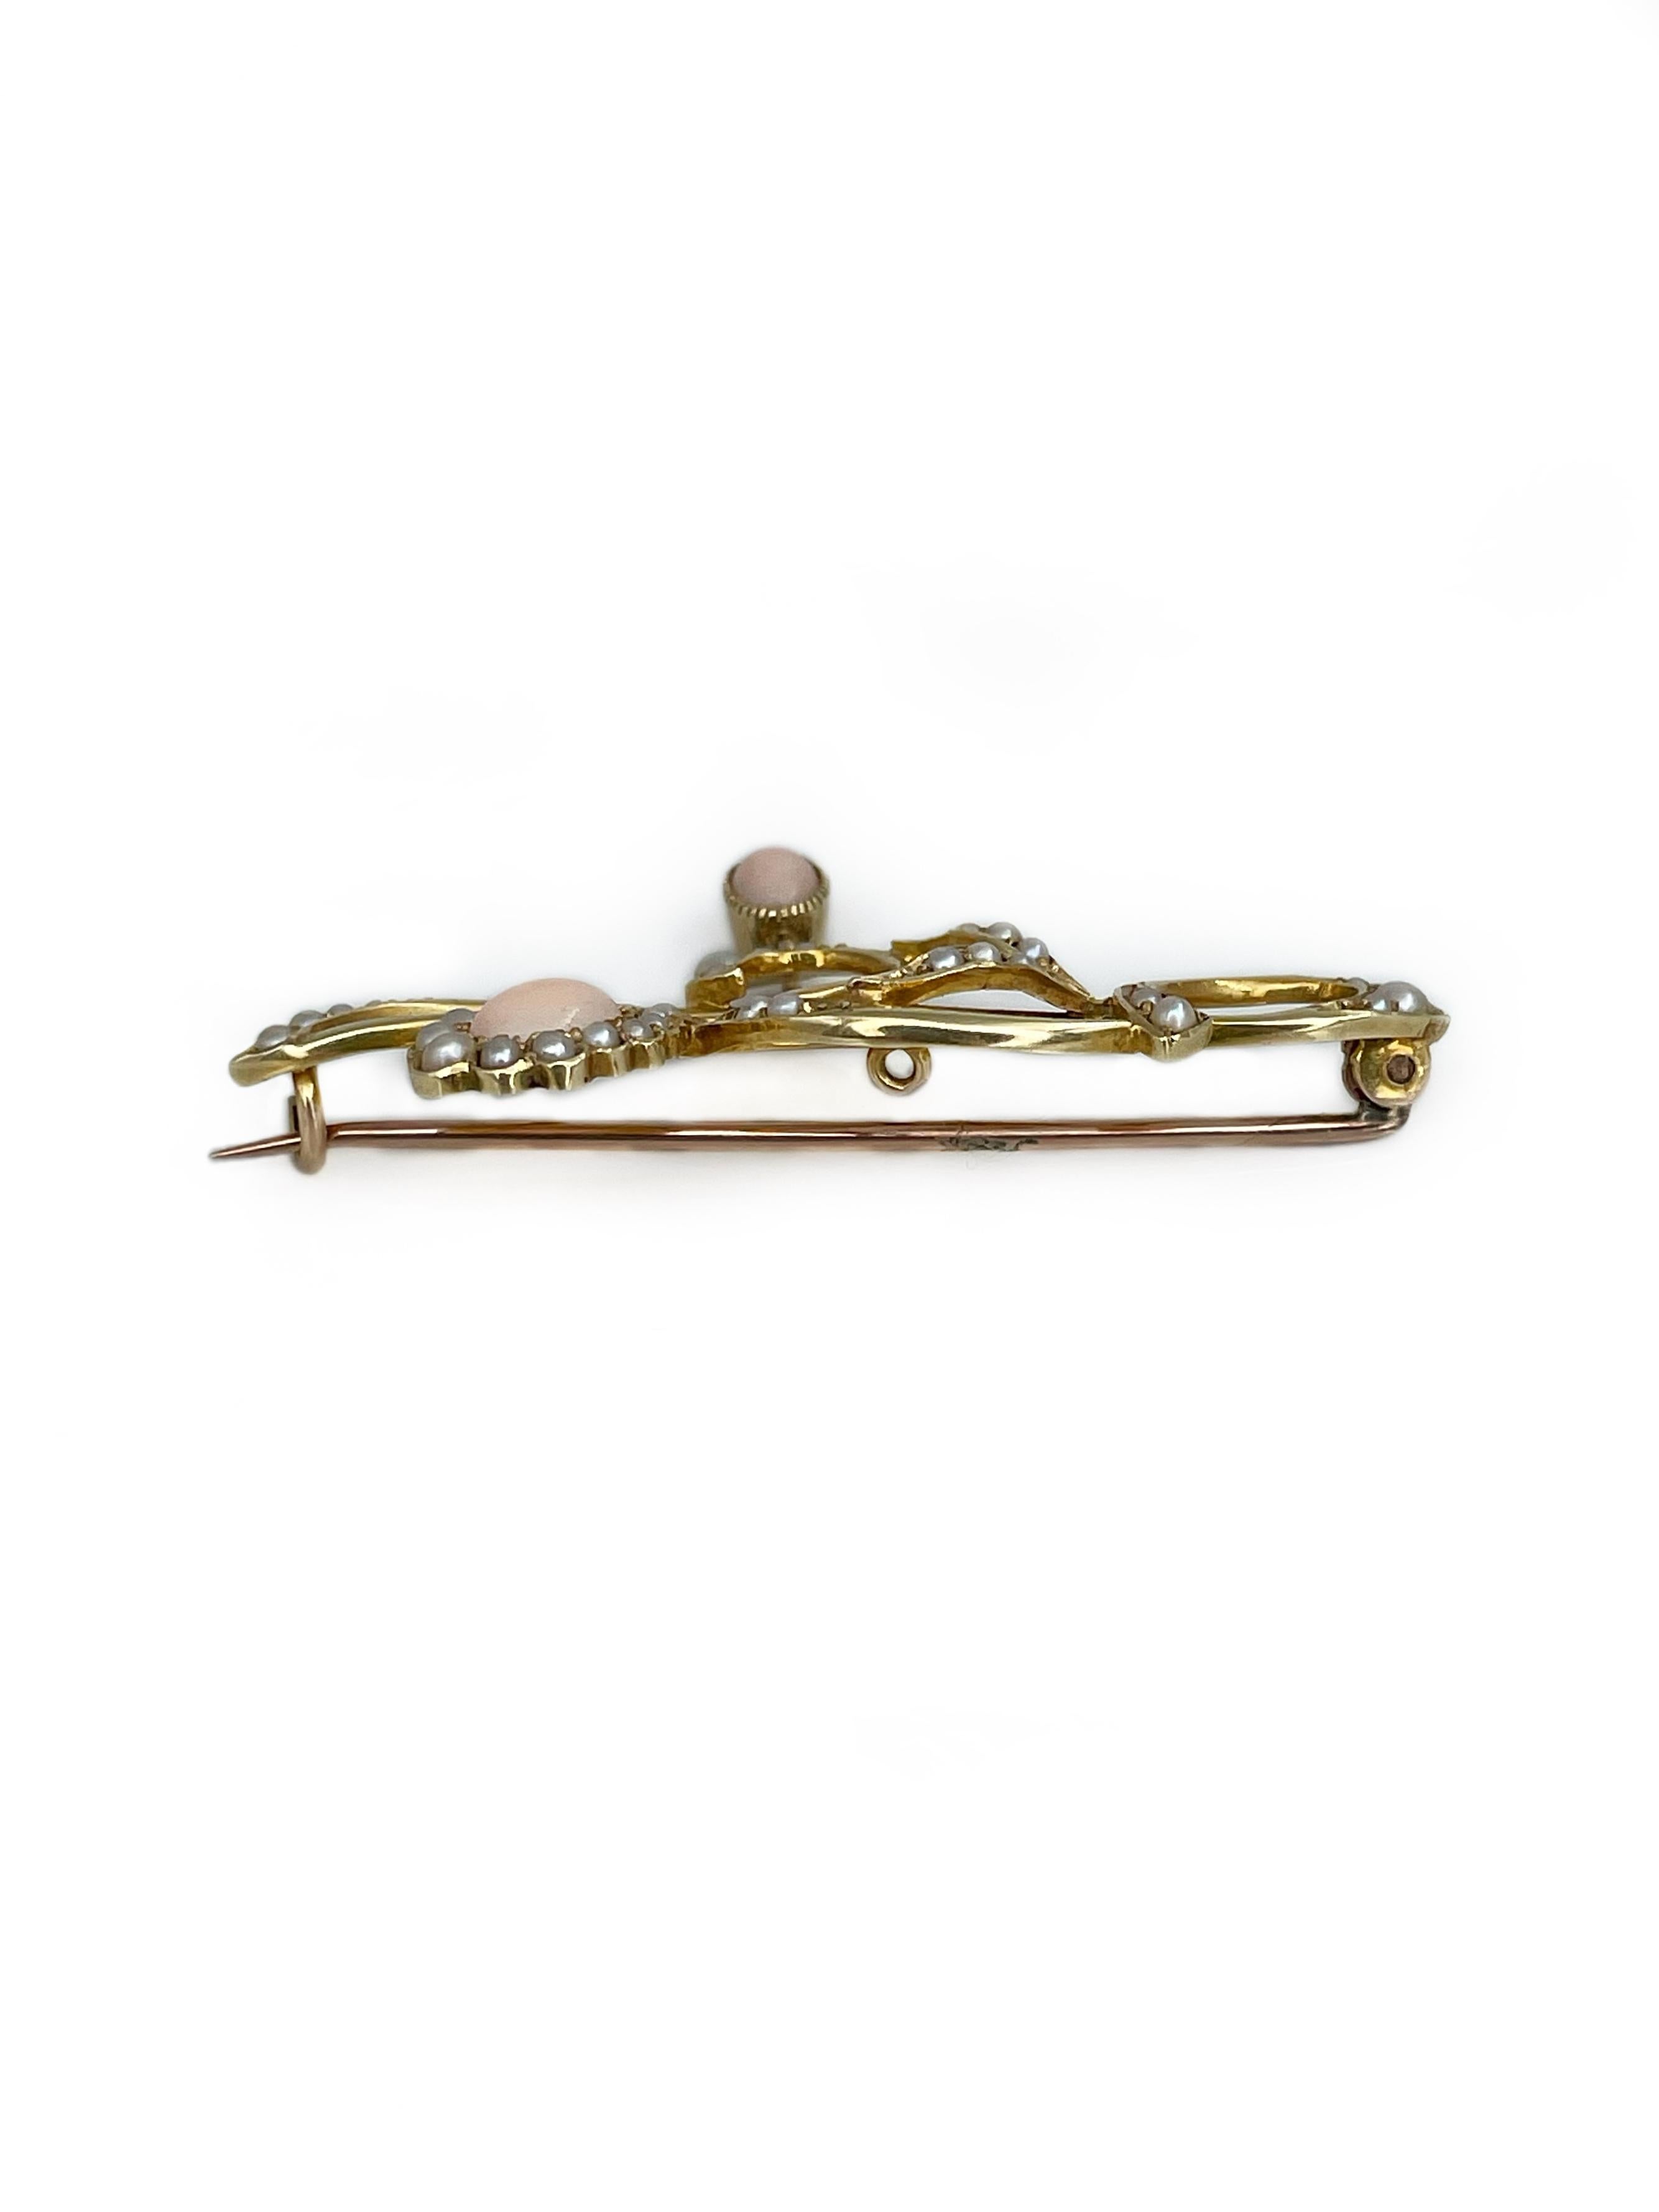 This is an elegant Edwardian floral design pin brooch crafted in 15K yellow gold. It features seed pearls. 

Weight: 4.70g
Size: 4.5x2.5cm

———

If you have any questions, please feel free to ask. We describe our items accurately. Please note that